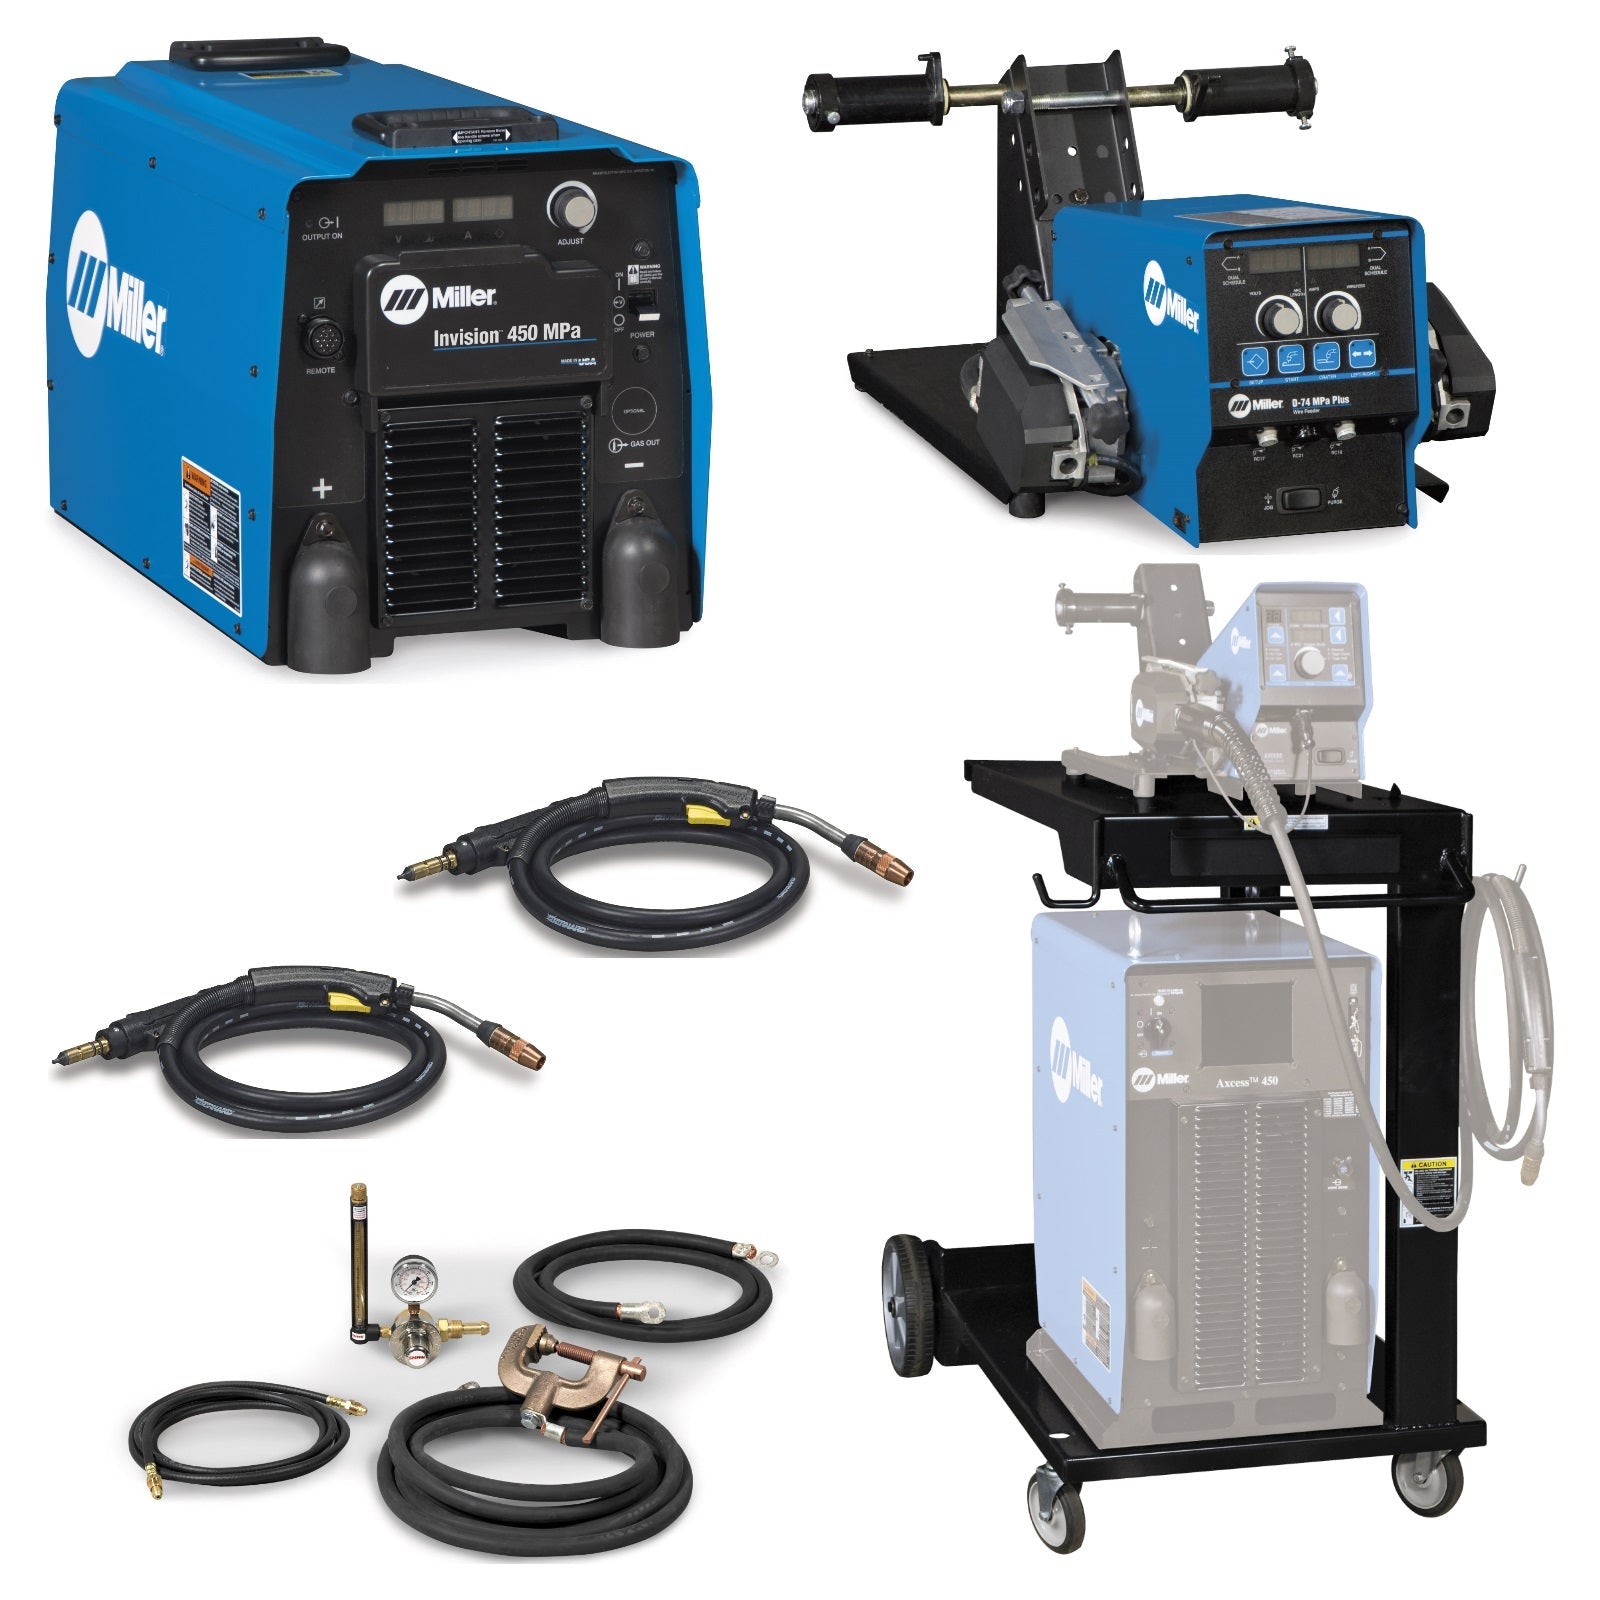 Miller Invision 450 MPa MIG Welder with D-74 Feeder, Accessory Package, and Cart (951457)